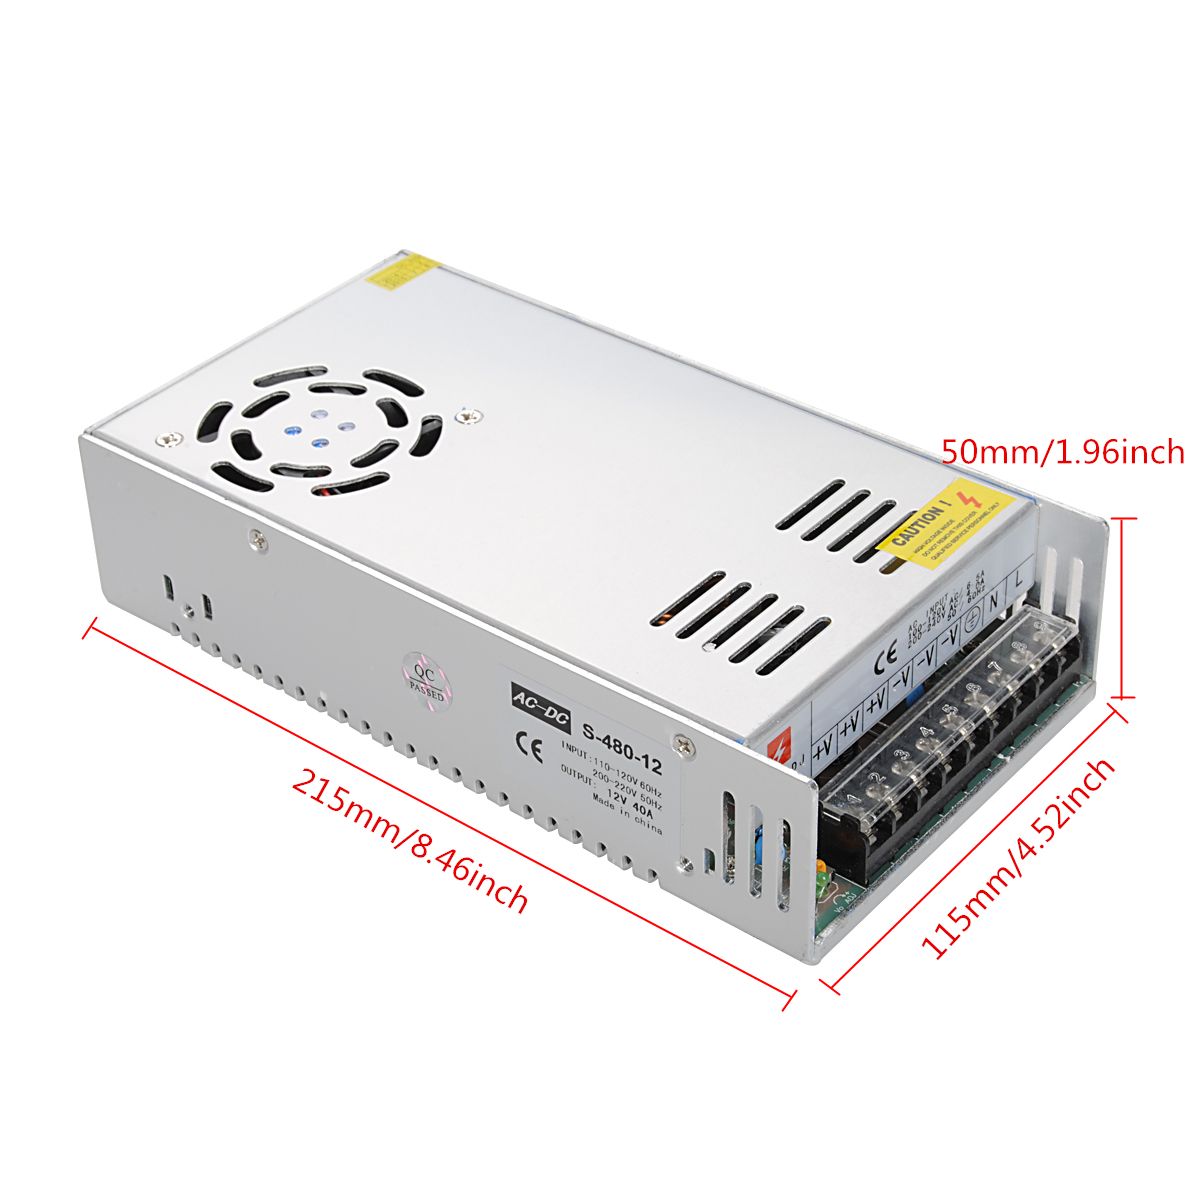 Switching-Power-Supply-85-265V-To-12V-40A-480W-For-LED-Strip-Light-968154